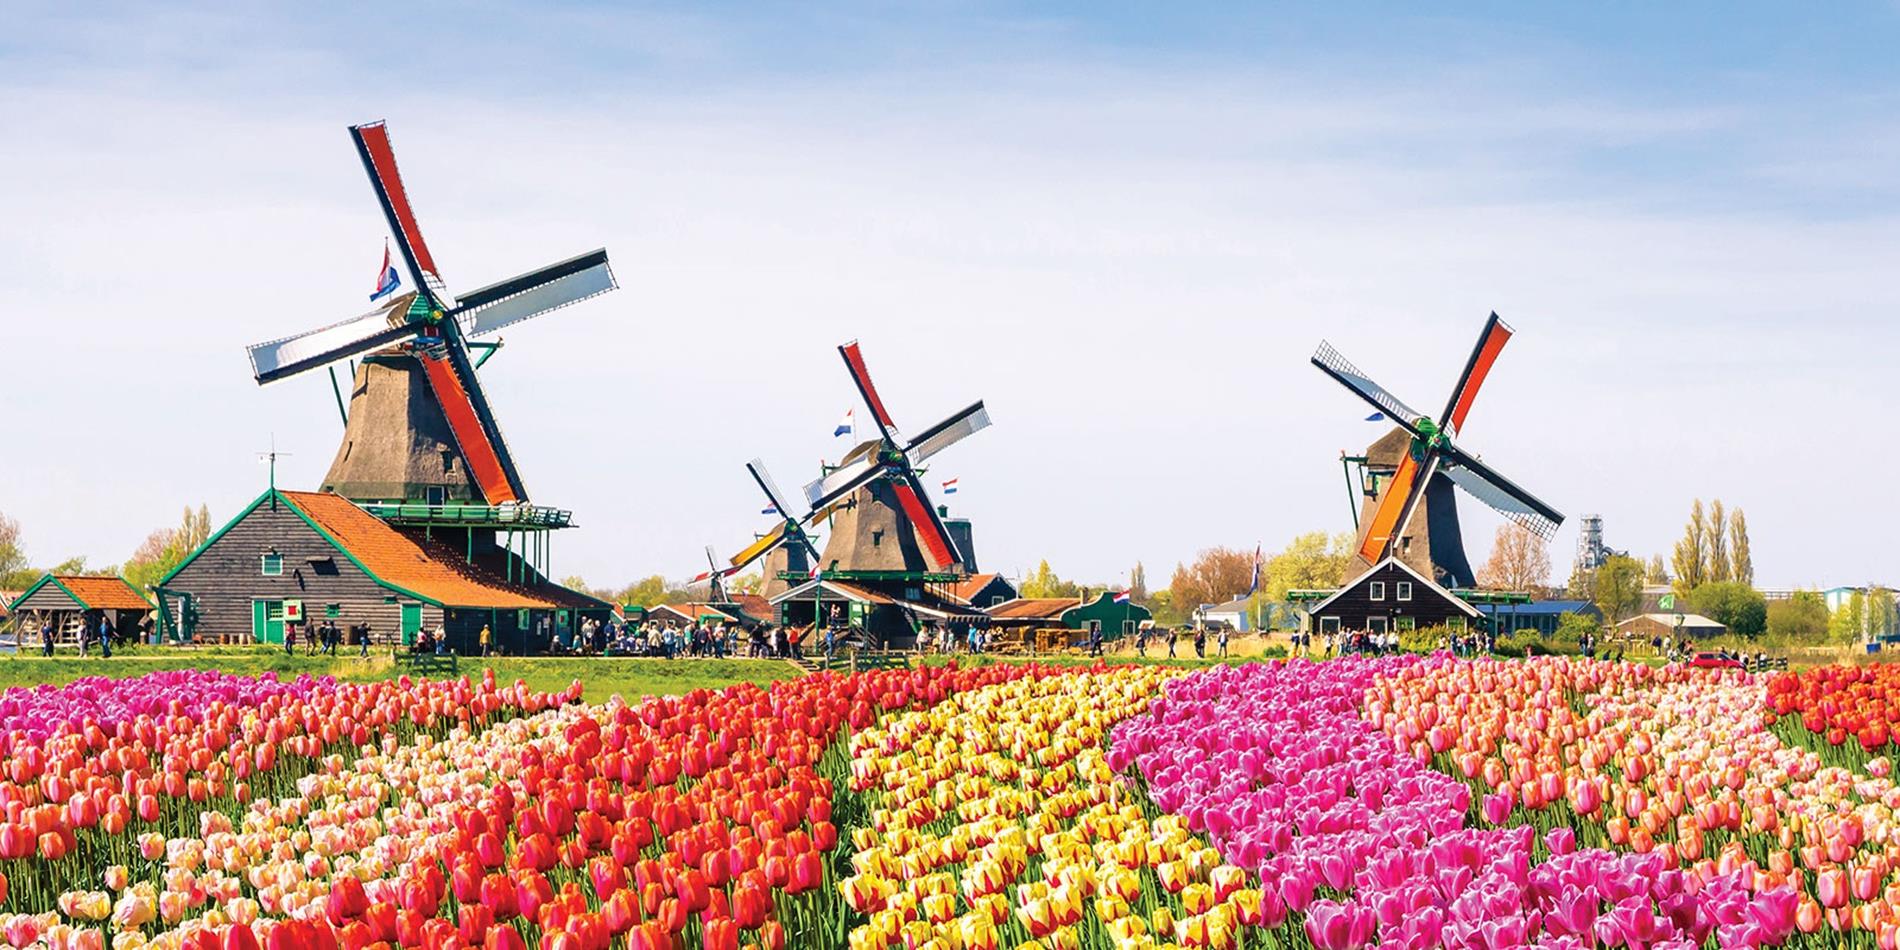 Colorful tulips decorate the grounds in front of the windmills